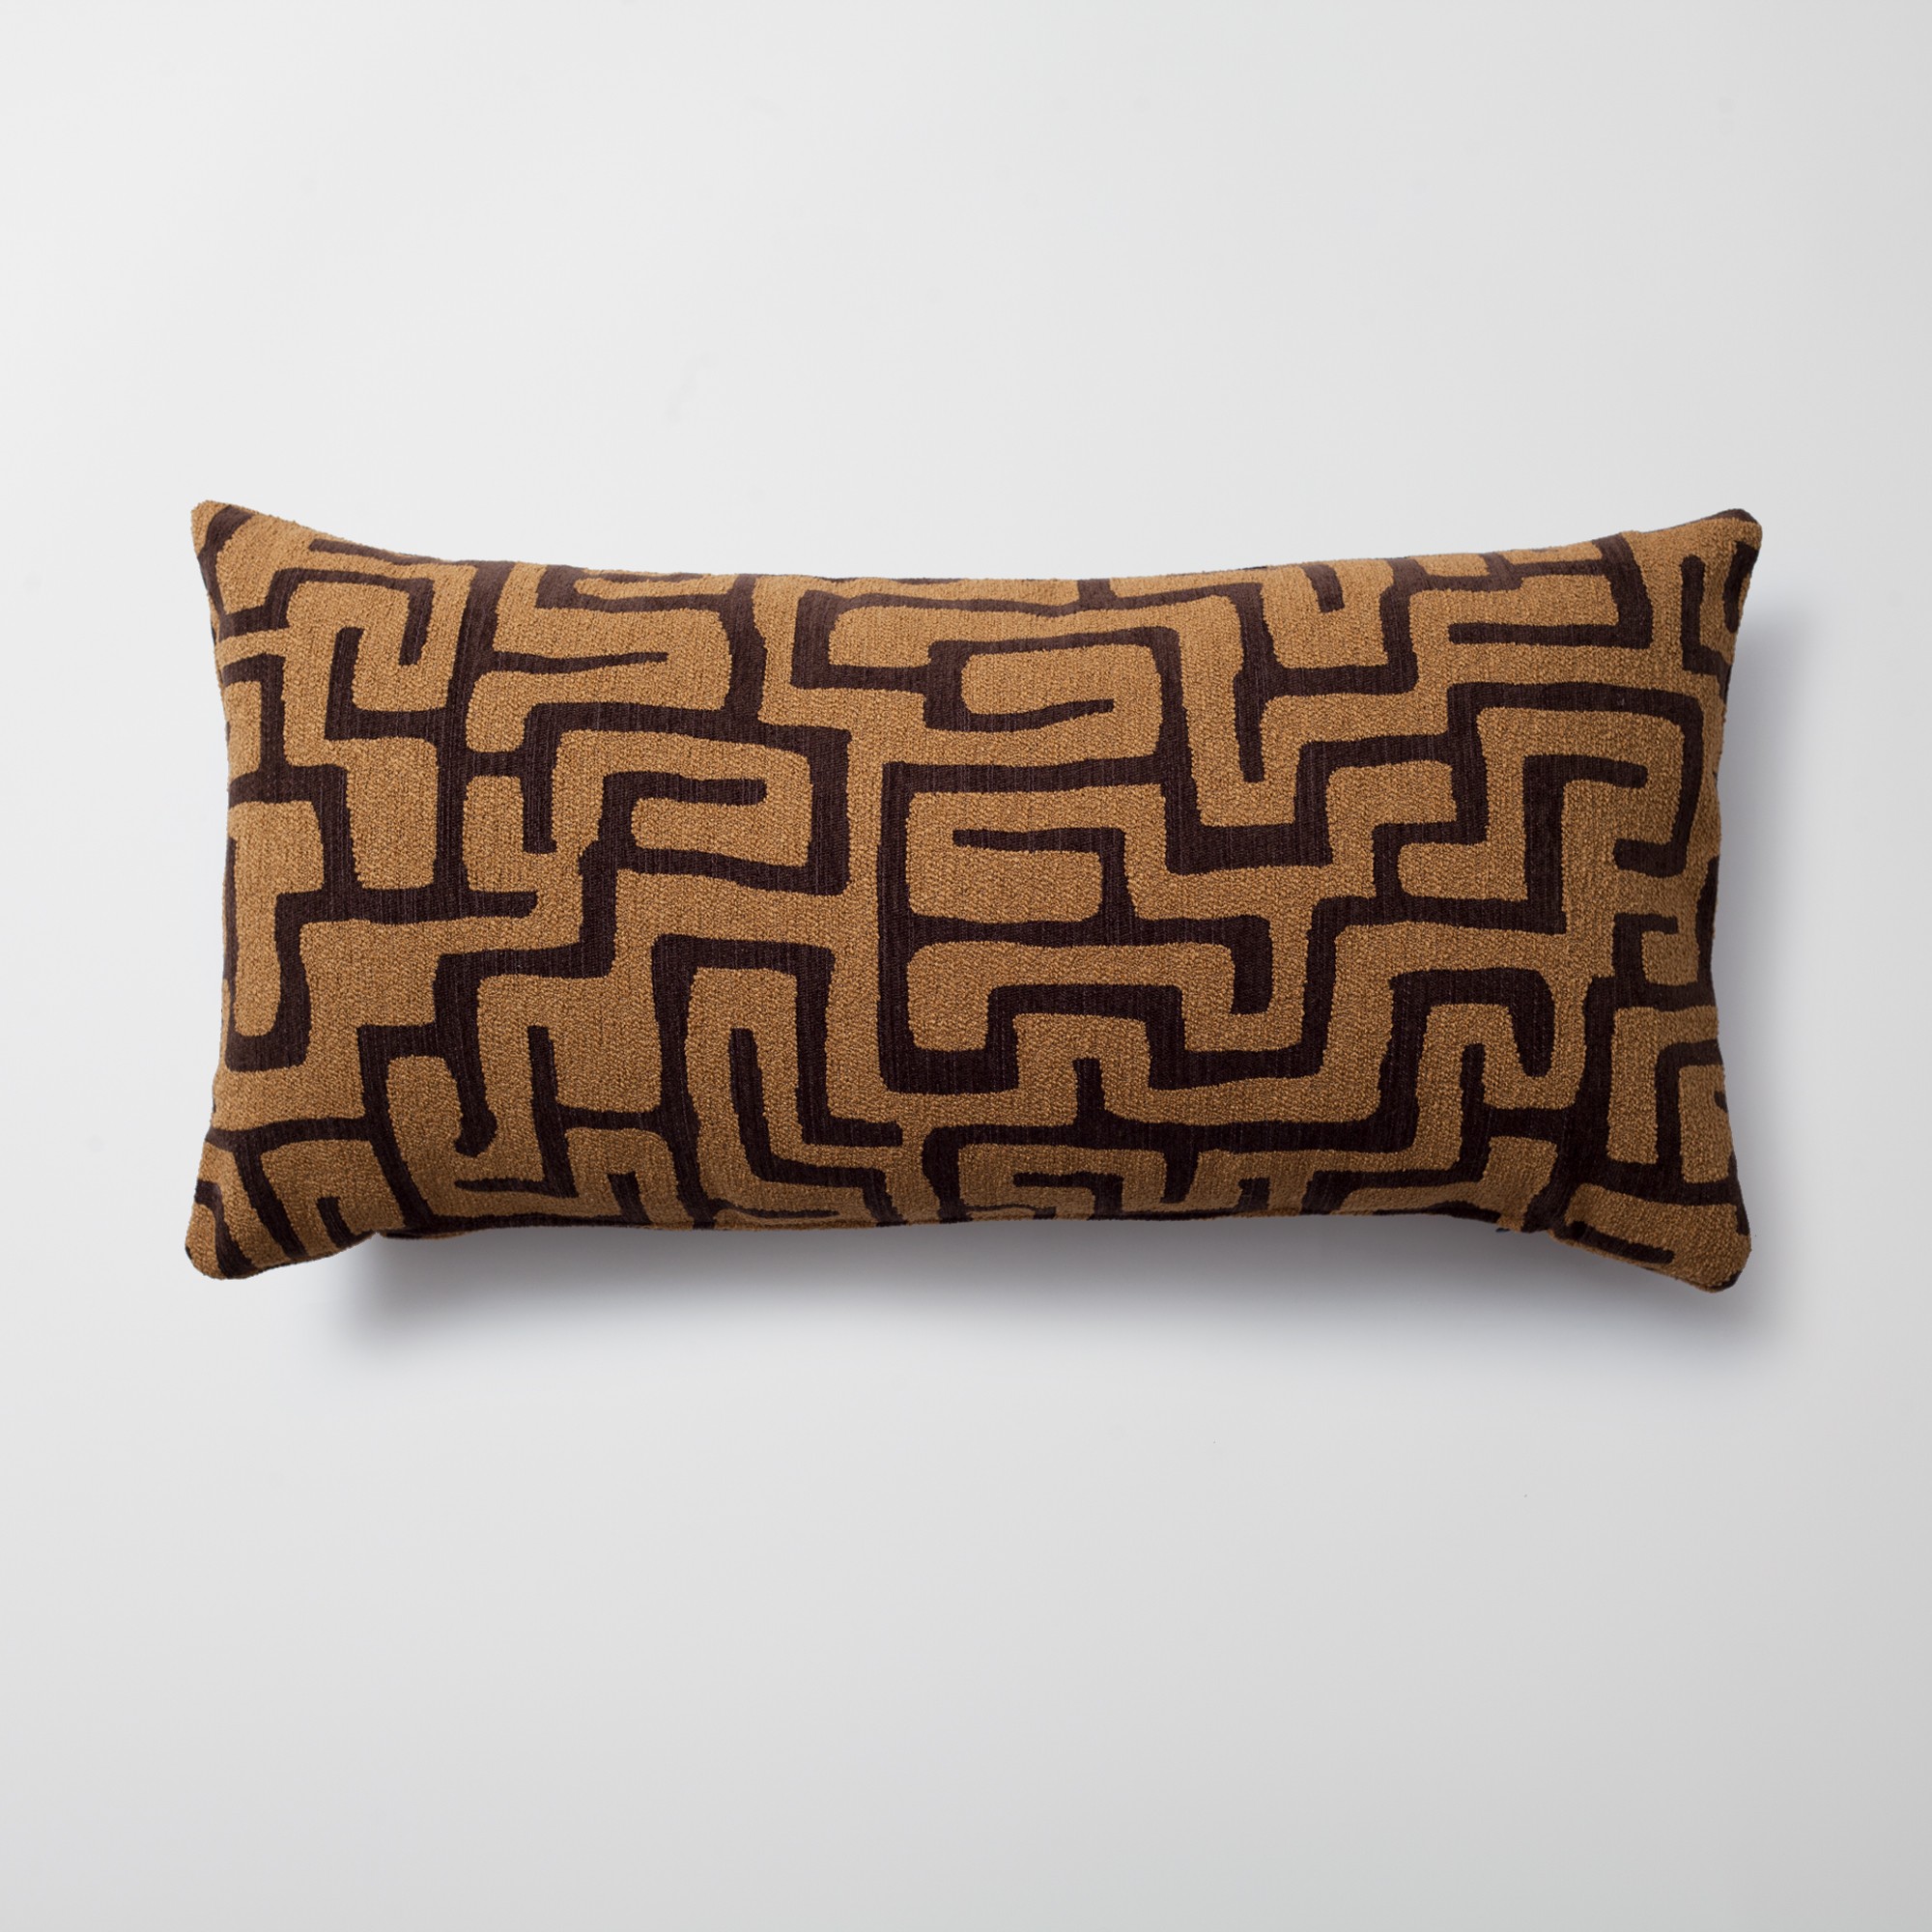 "Norm" - Maze Patterned 14x28 Inch Pillow - Brown (Cover Only)